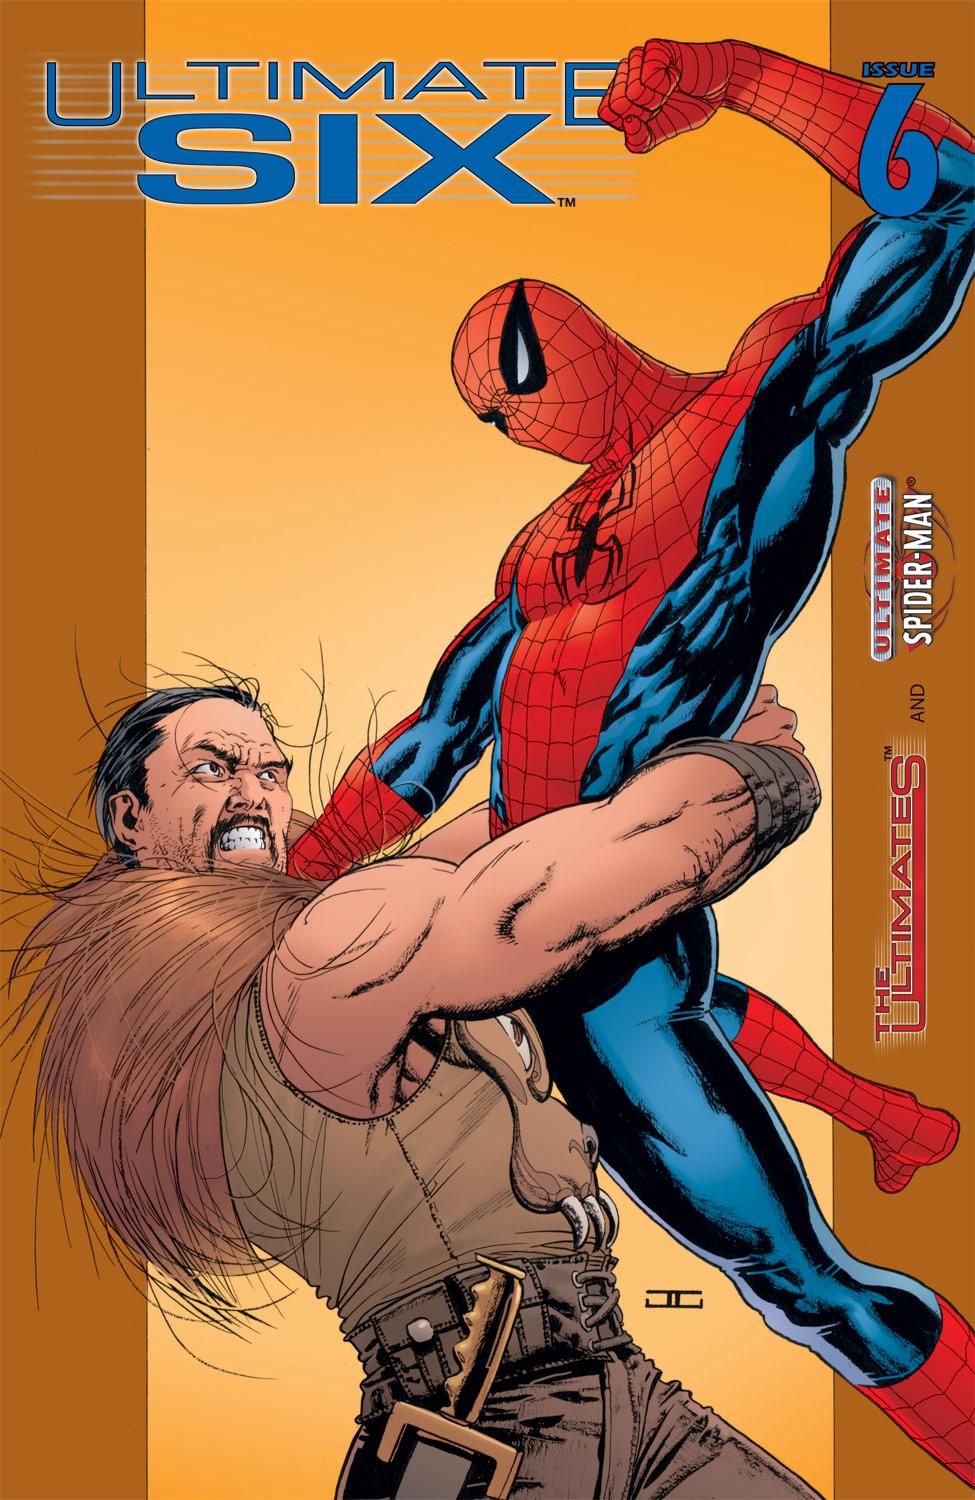 Ultimate Spider-Man Vol. 9: Ultimate Six (Trade Paperback)